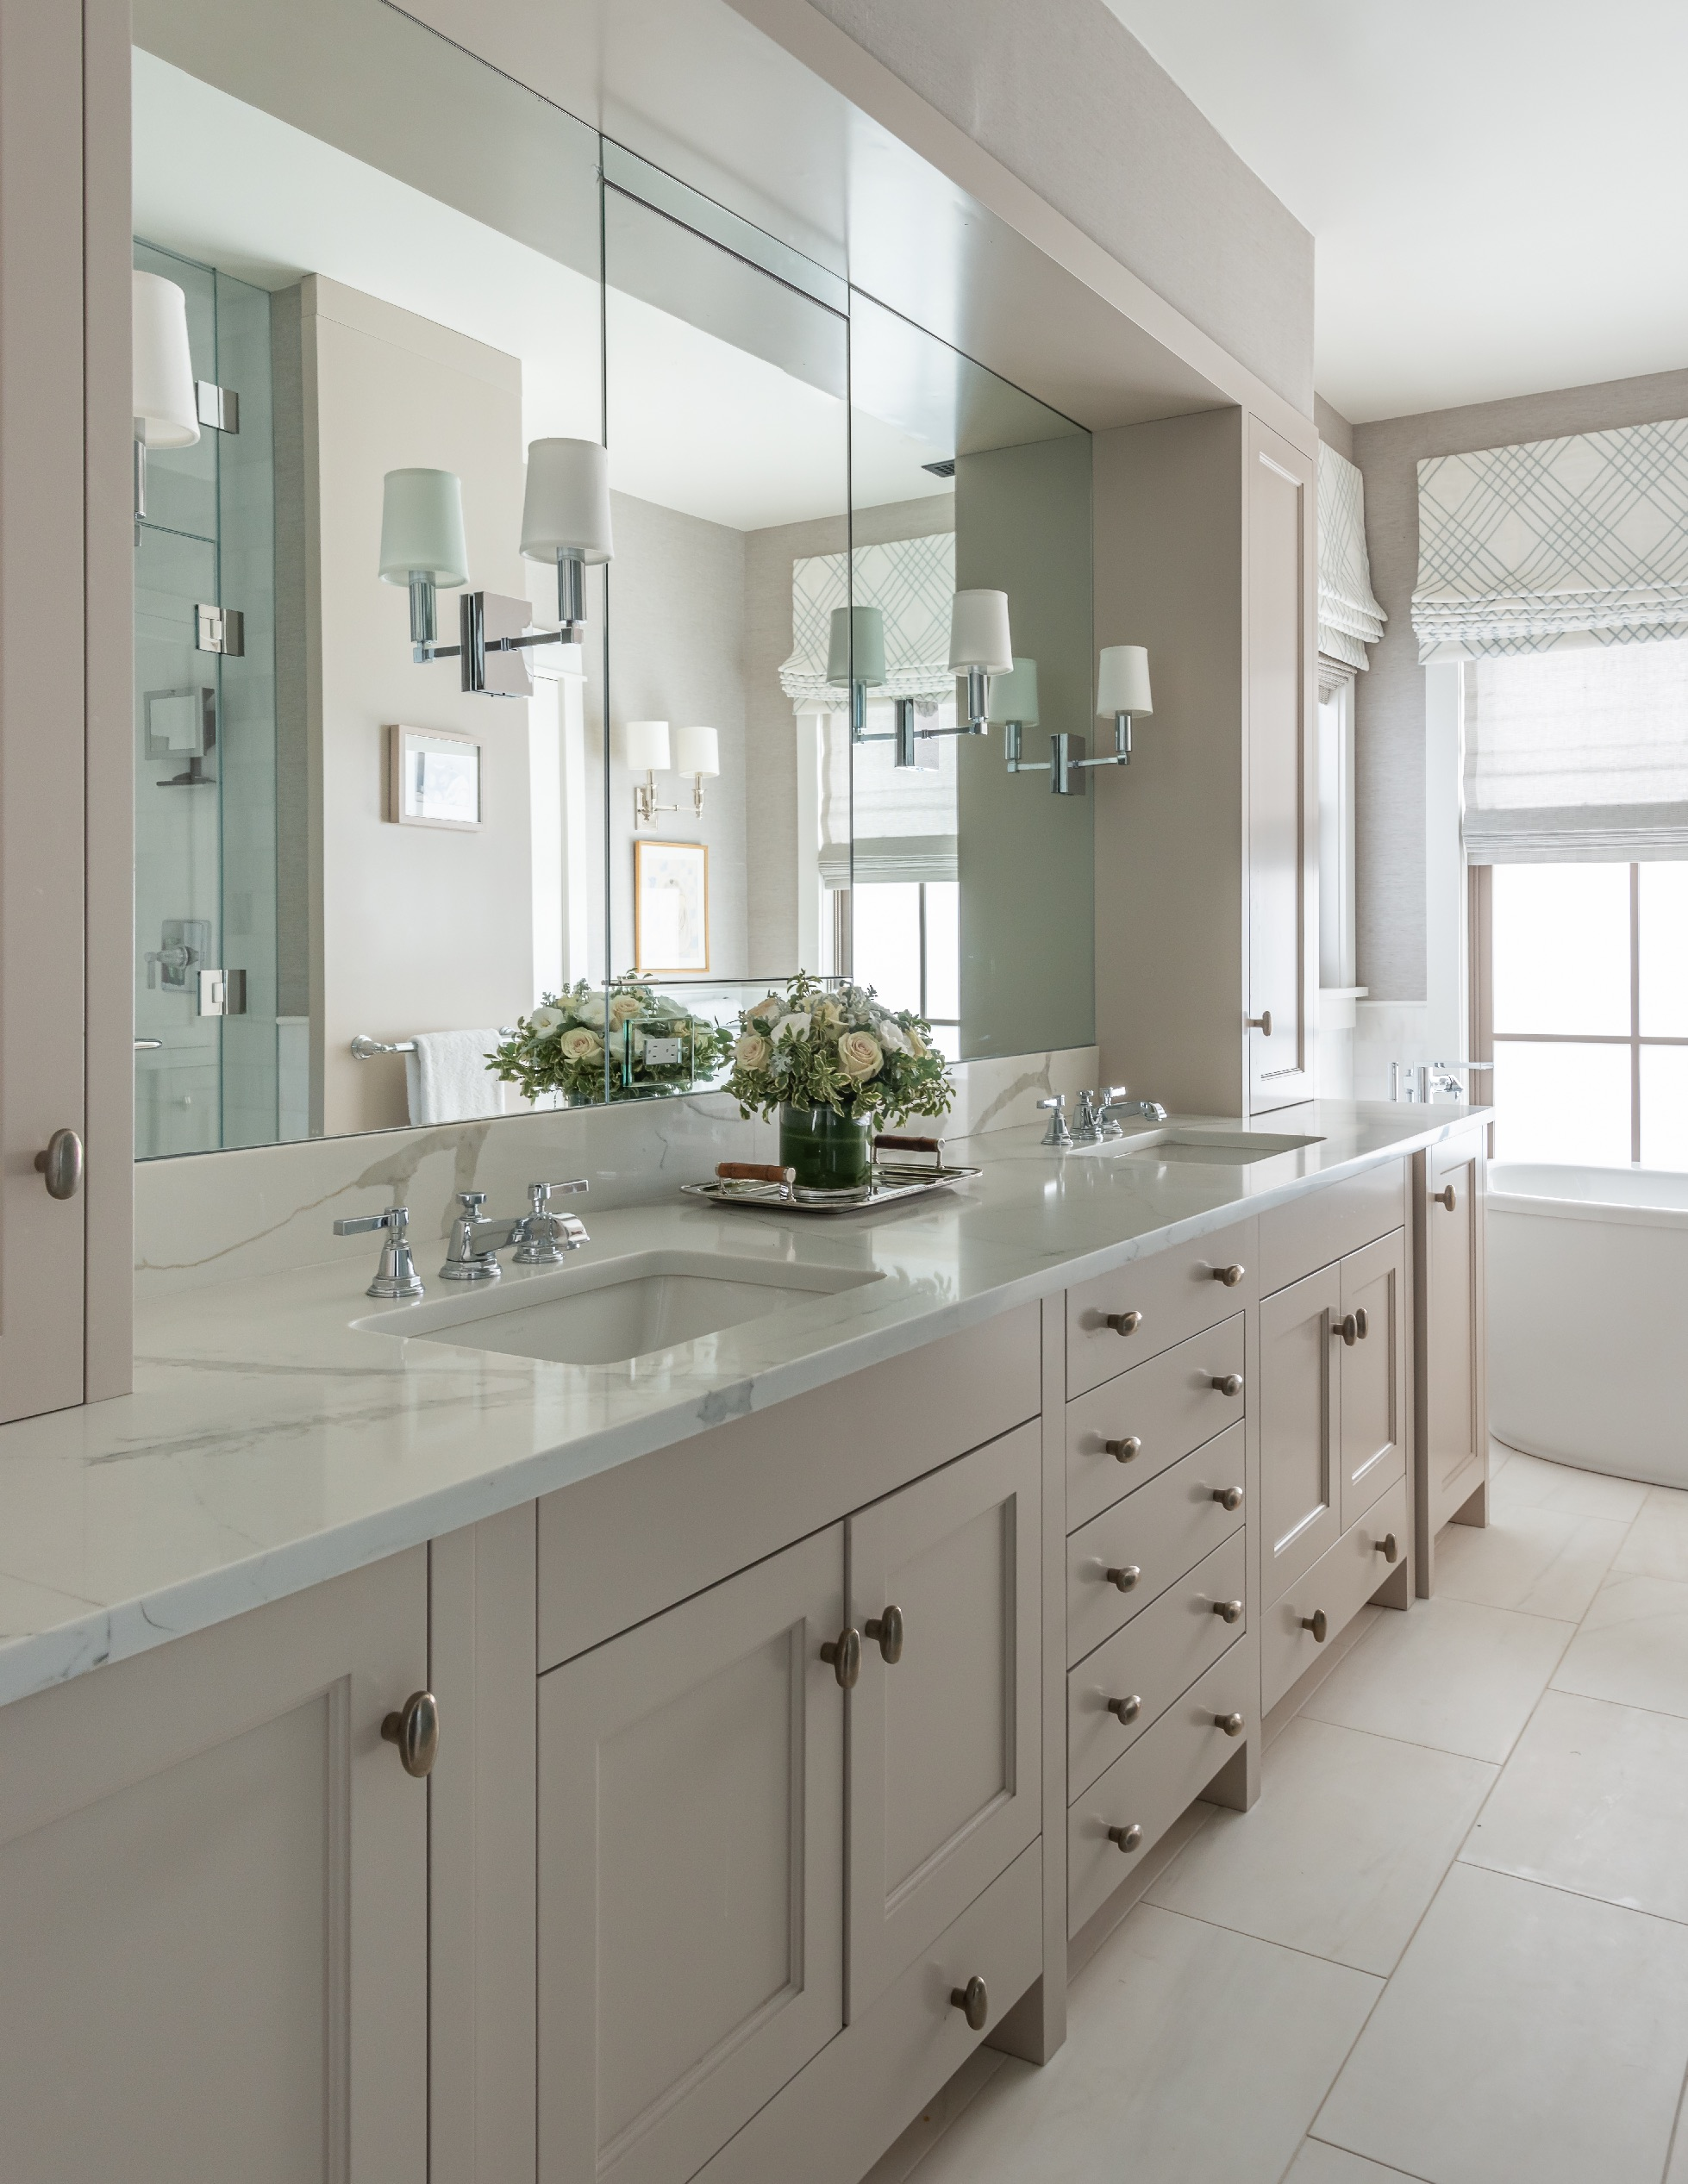  Modern Vacation Home Bathroom. Snedens Landing Residence by Alan Tanksley, Inc..